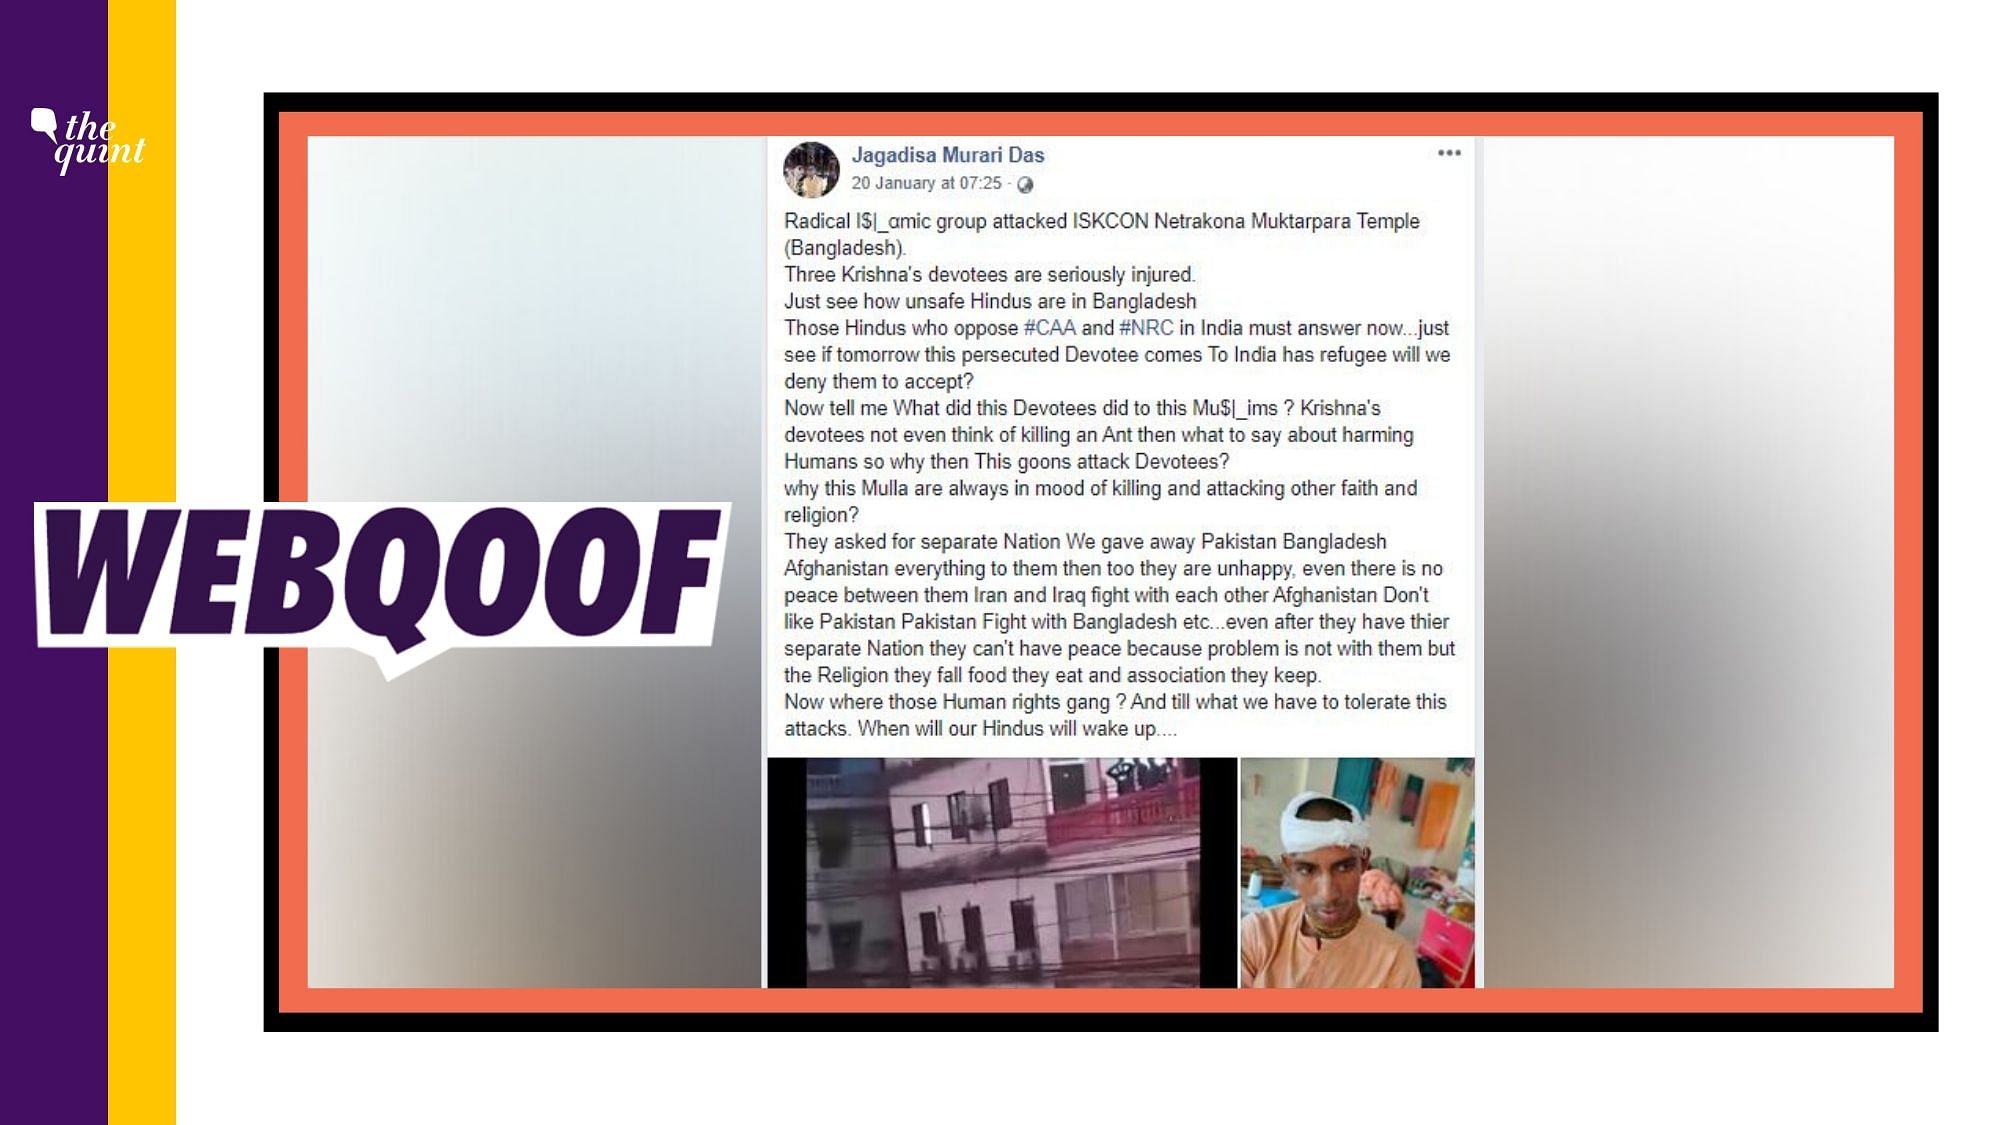 A post has been circulated on social media with the claim that a “Radical Islamic group” attacked ISKCON Temple in Bangladesh.